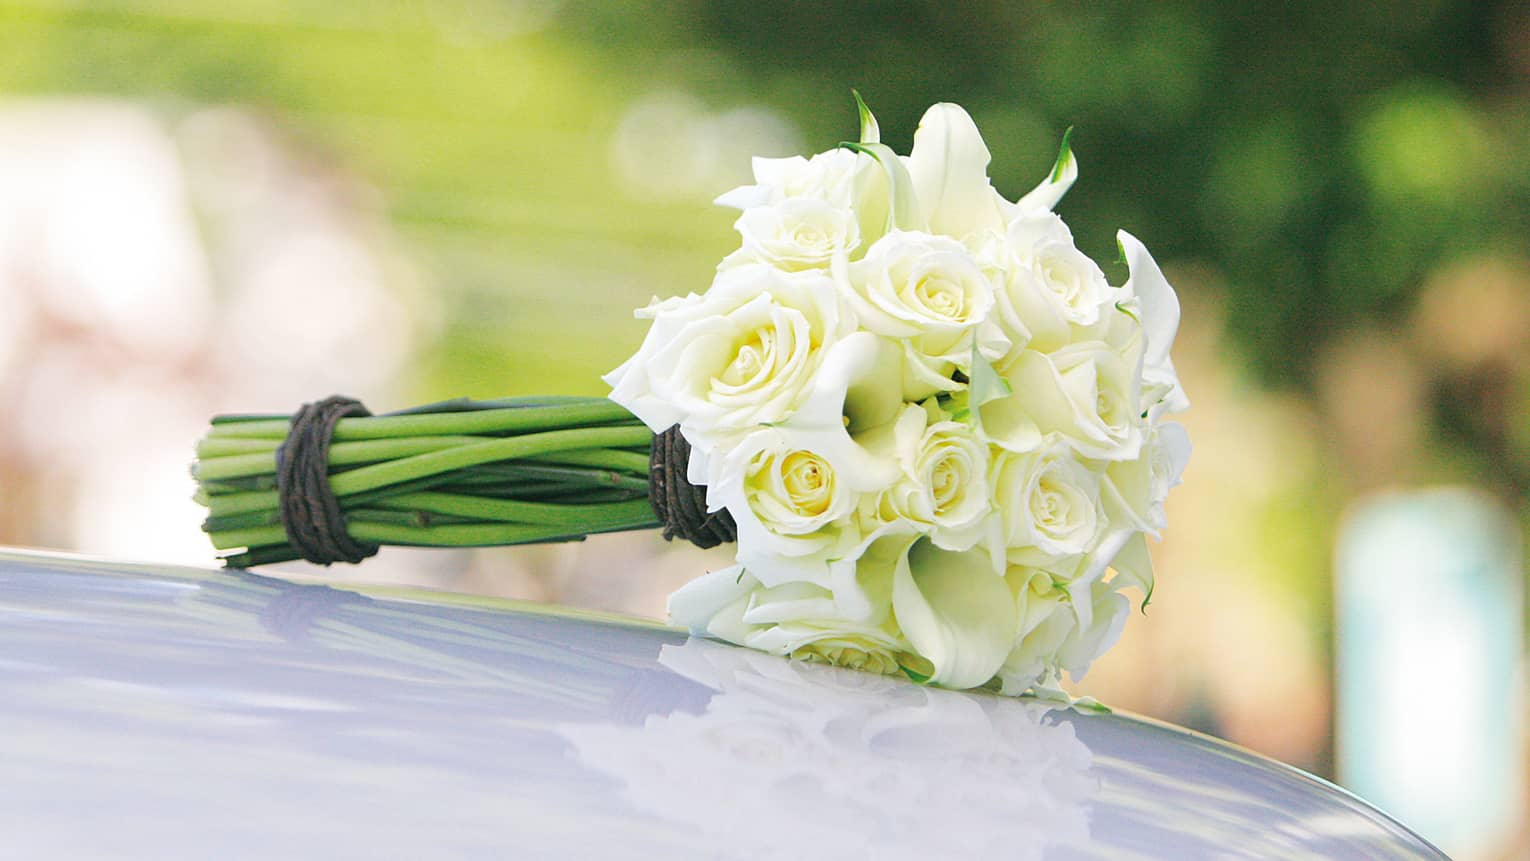 Wedding bouquet of white roses rests on hood of white car